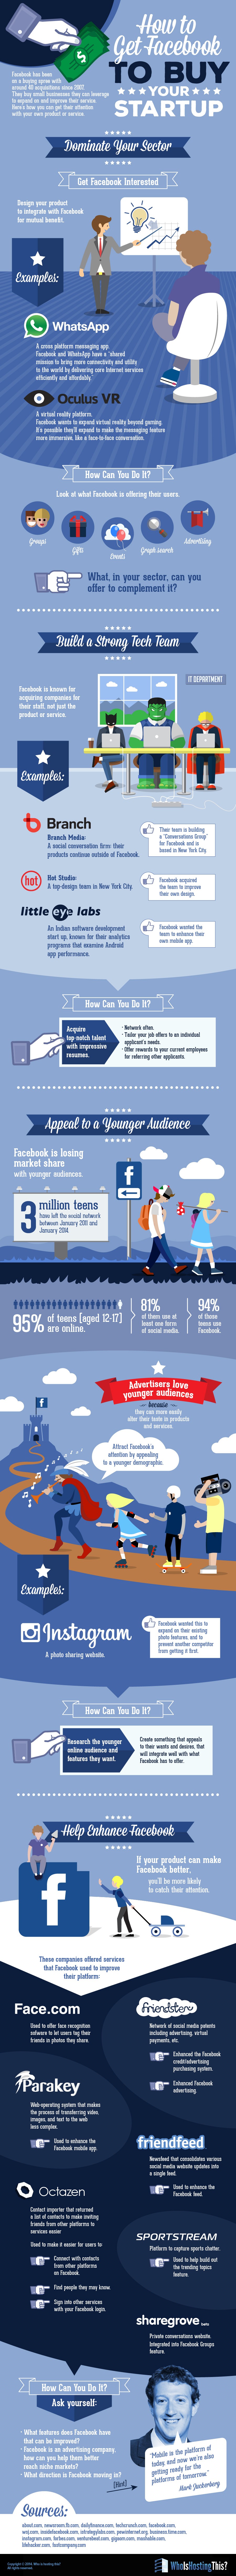 How to Get Facebook to Buy Your Startup - #infographic